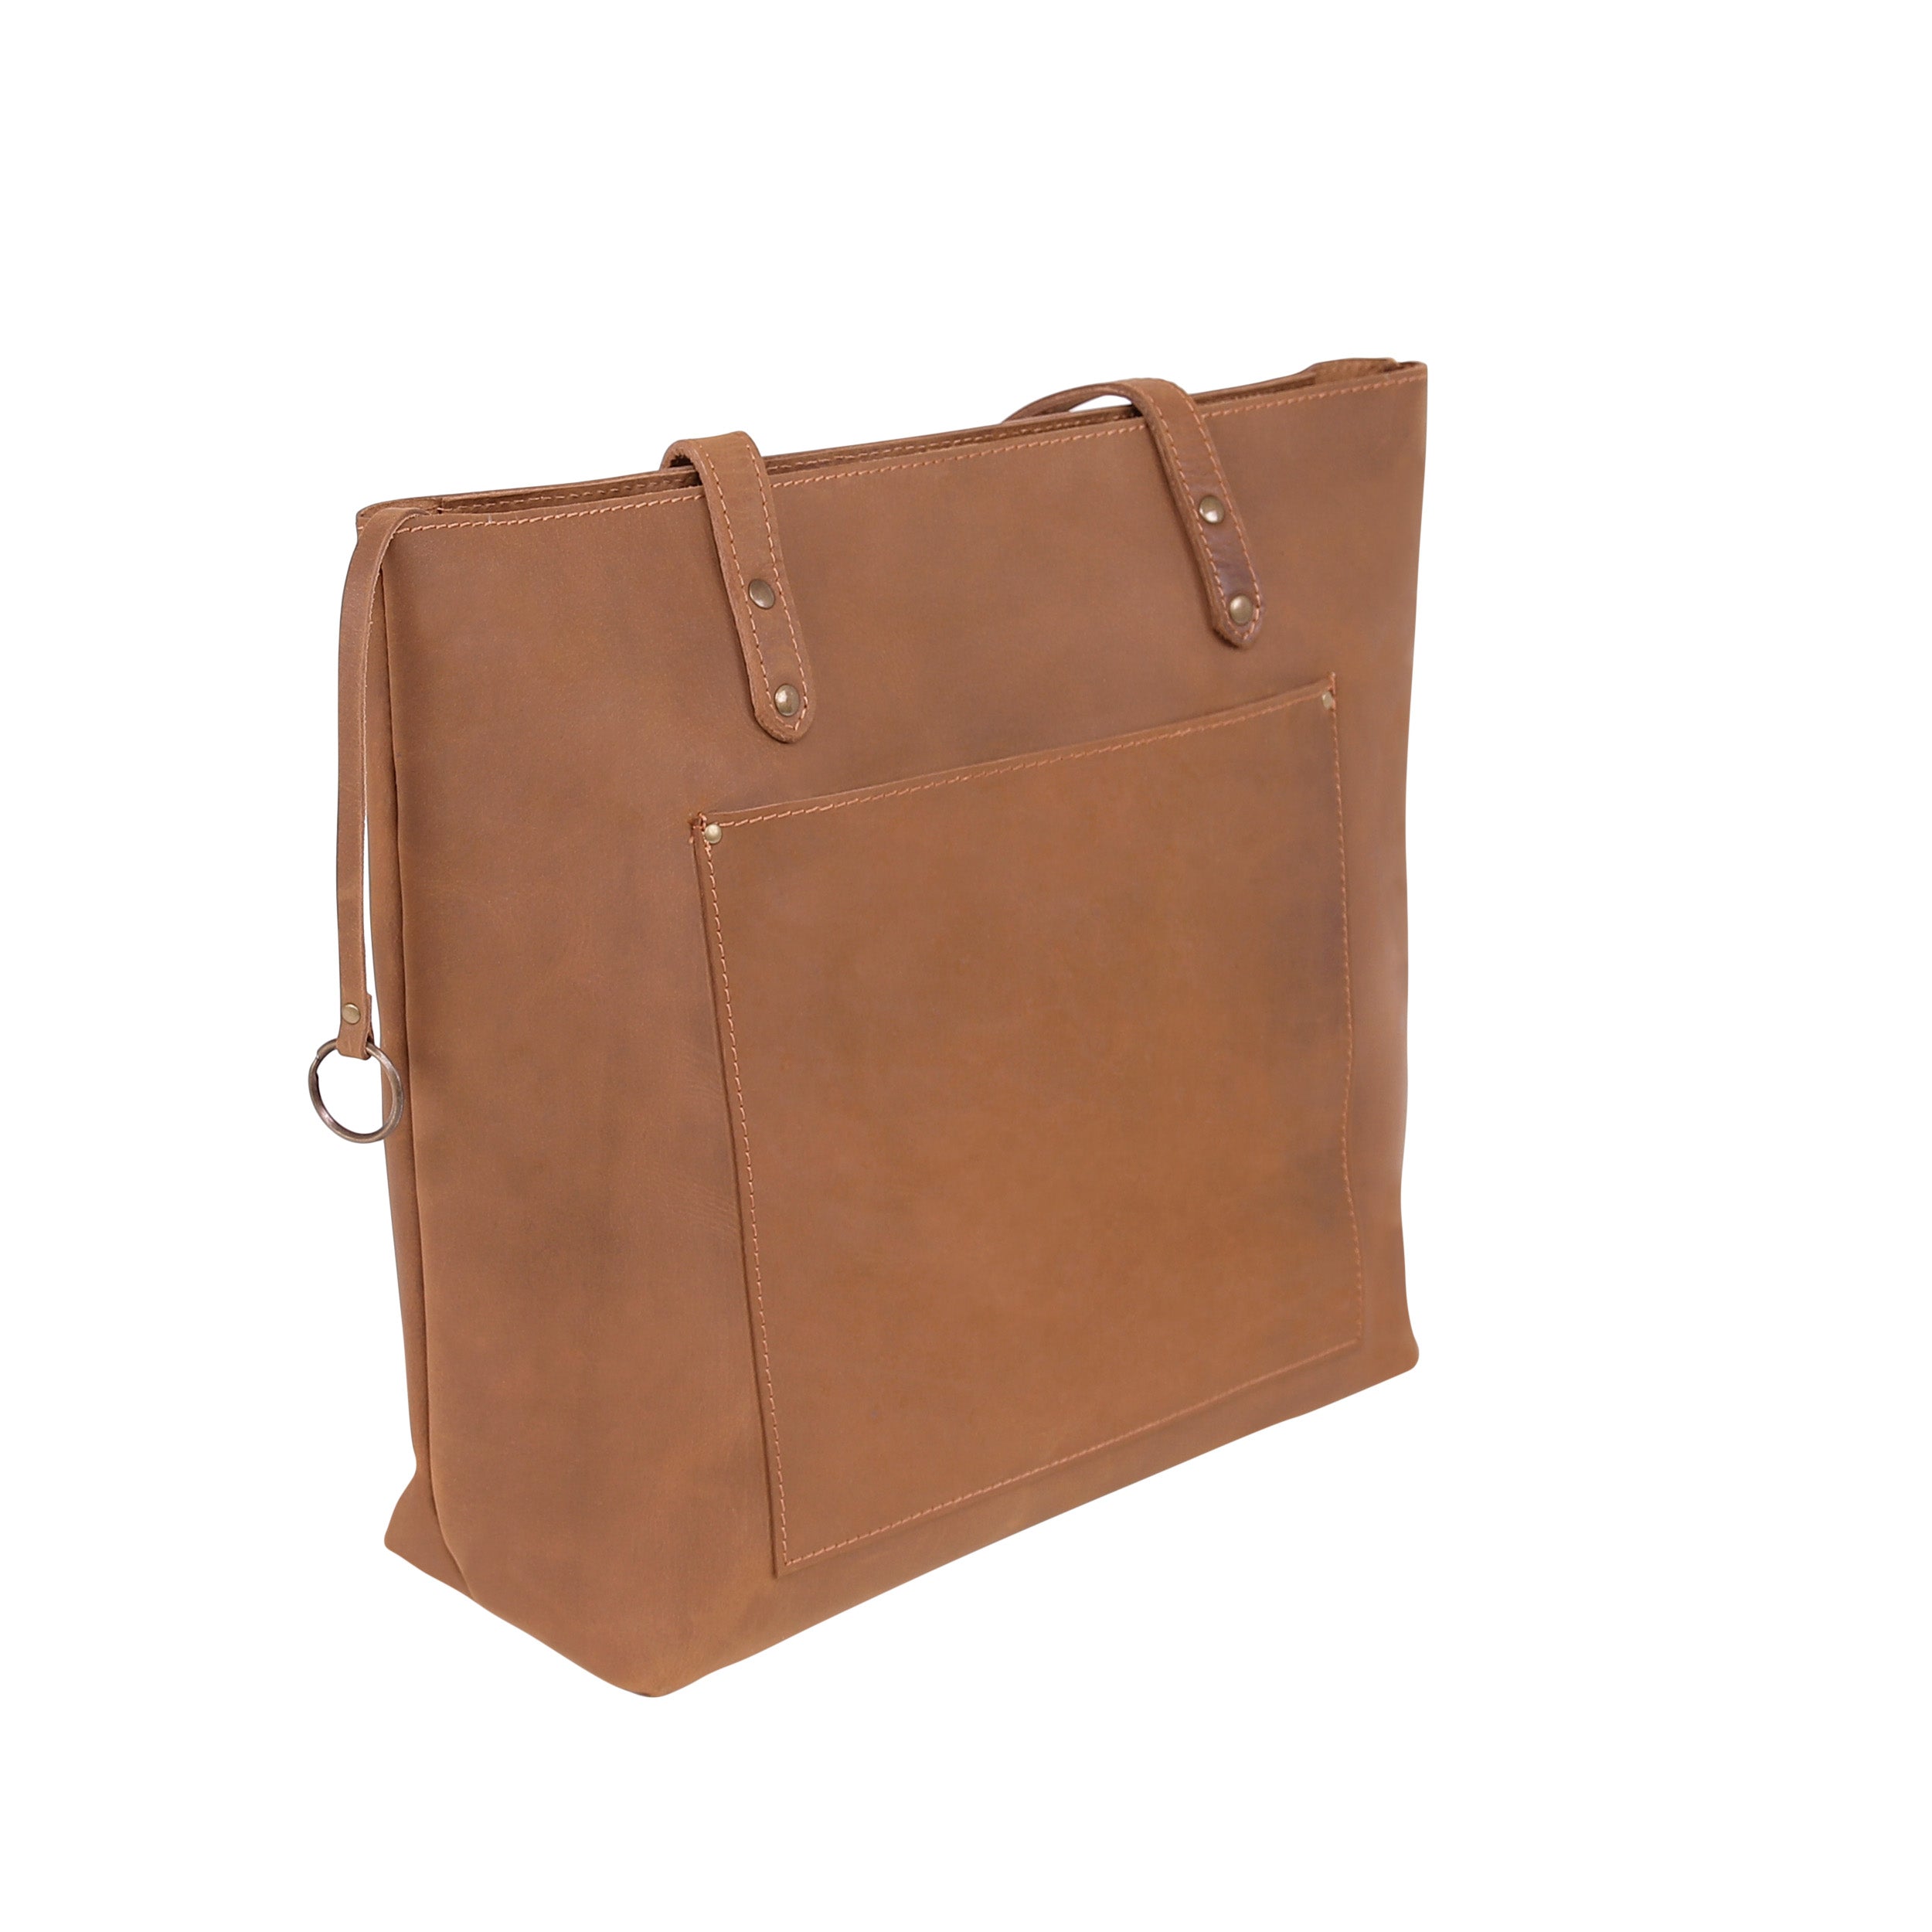 Leather Tote Bag 9917 - Light Brown